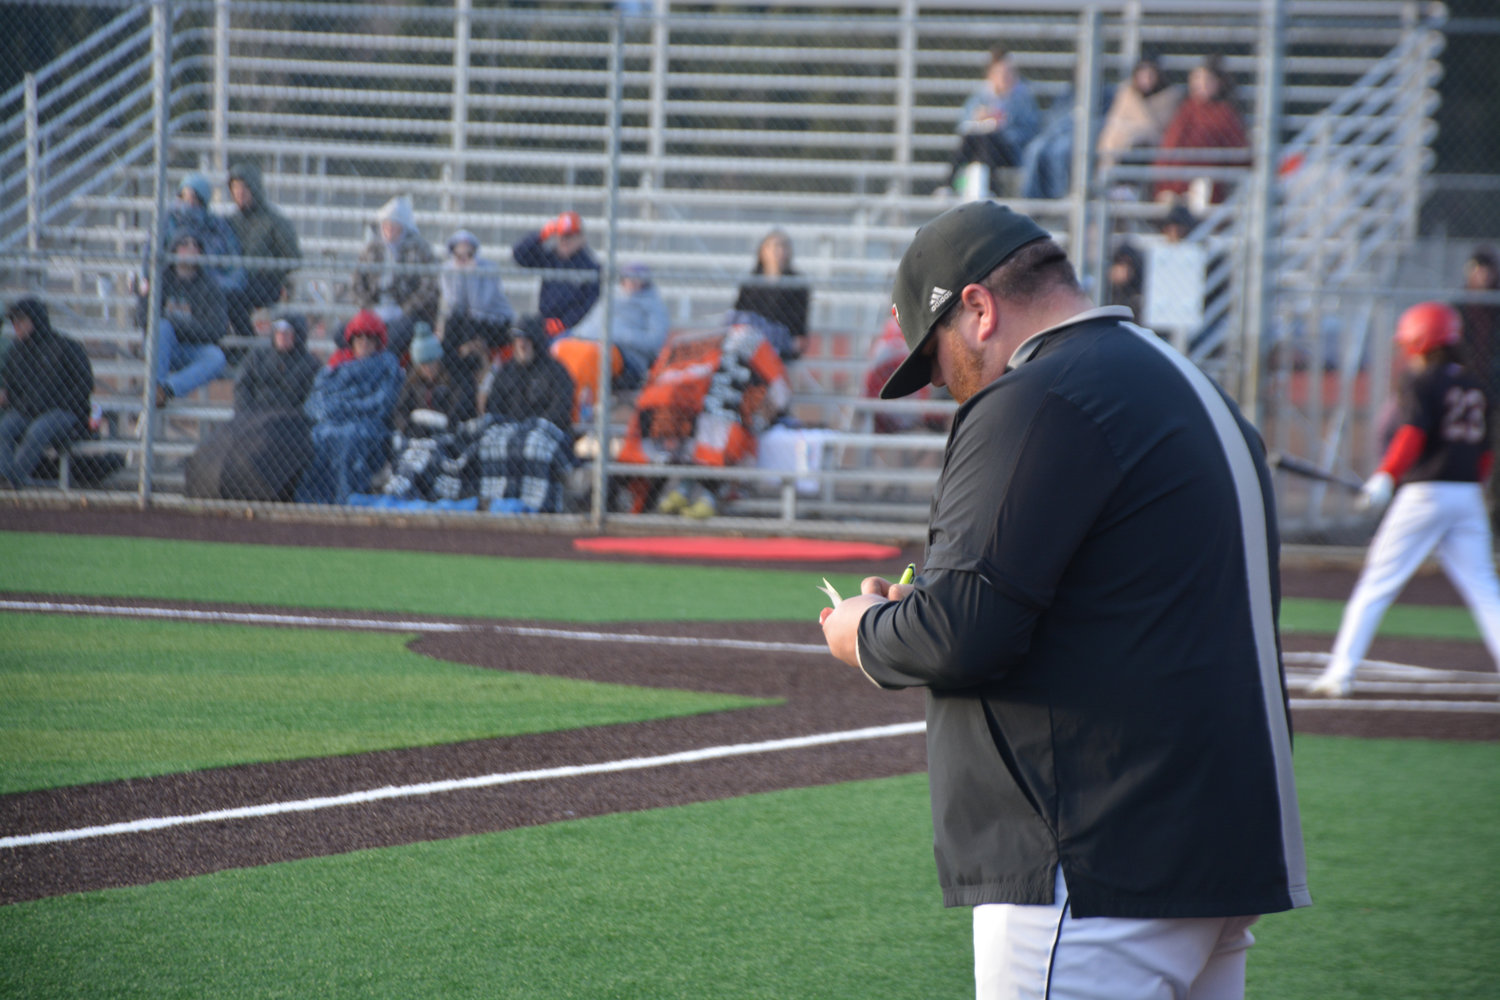 Yelm Head Coach Zach Miller takes notes as one of his players awaits a pitch during a game against Rainier on Friday, March 10.